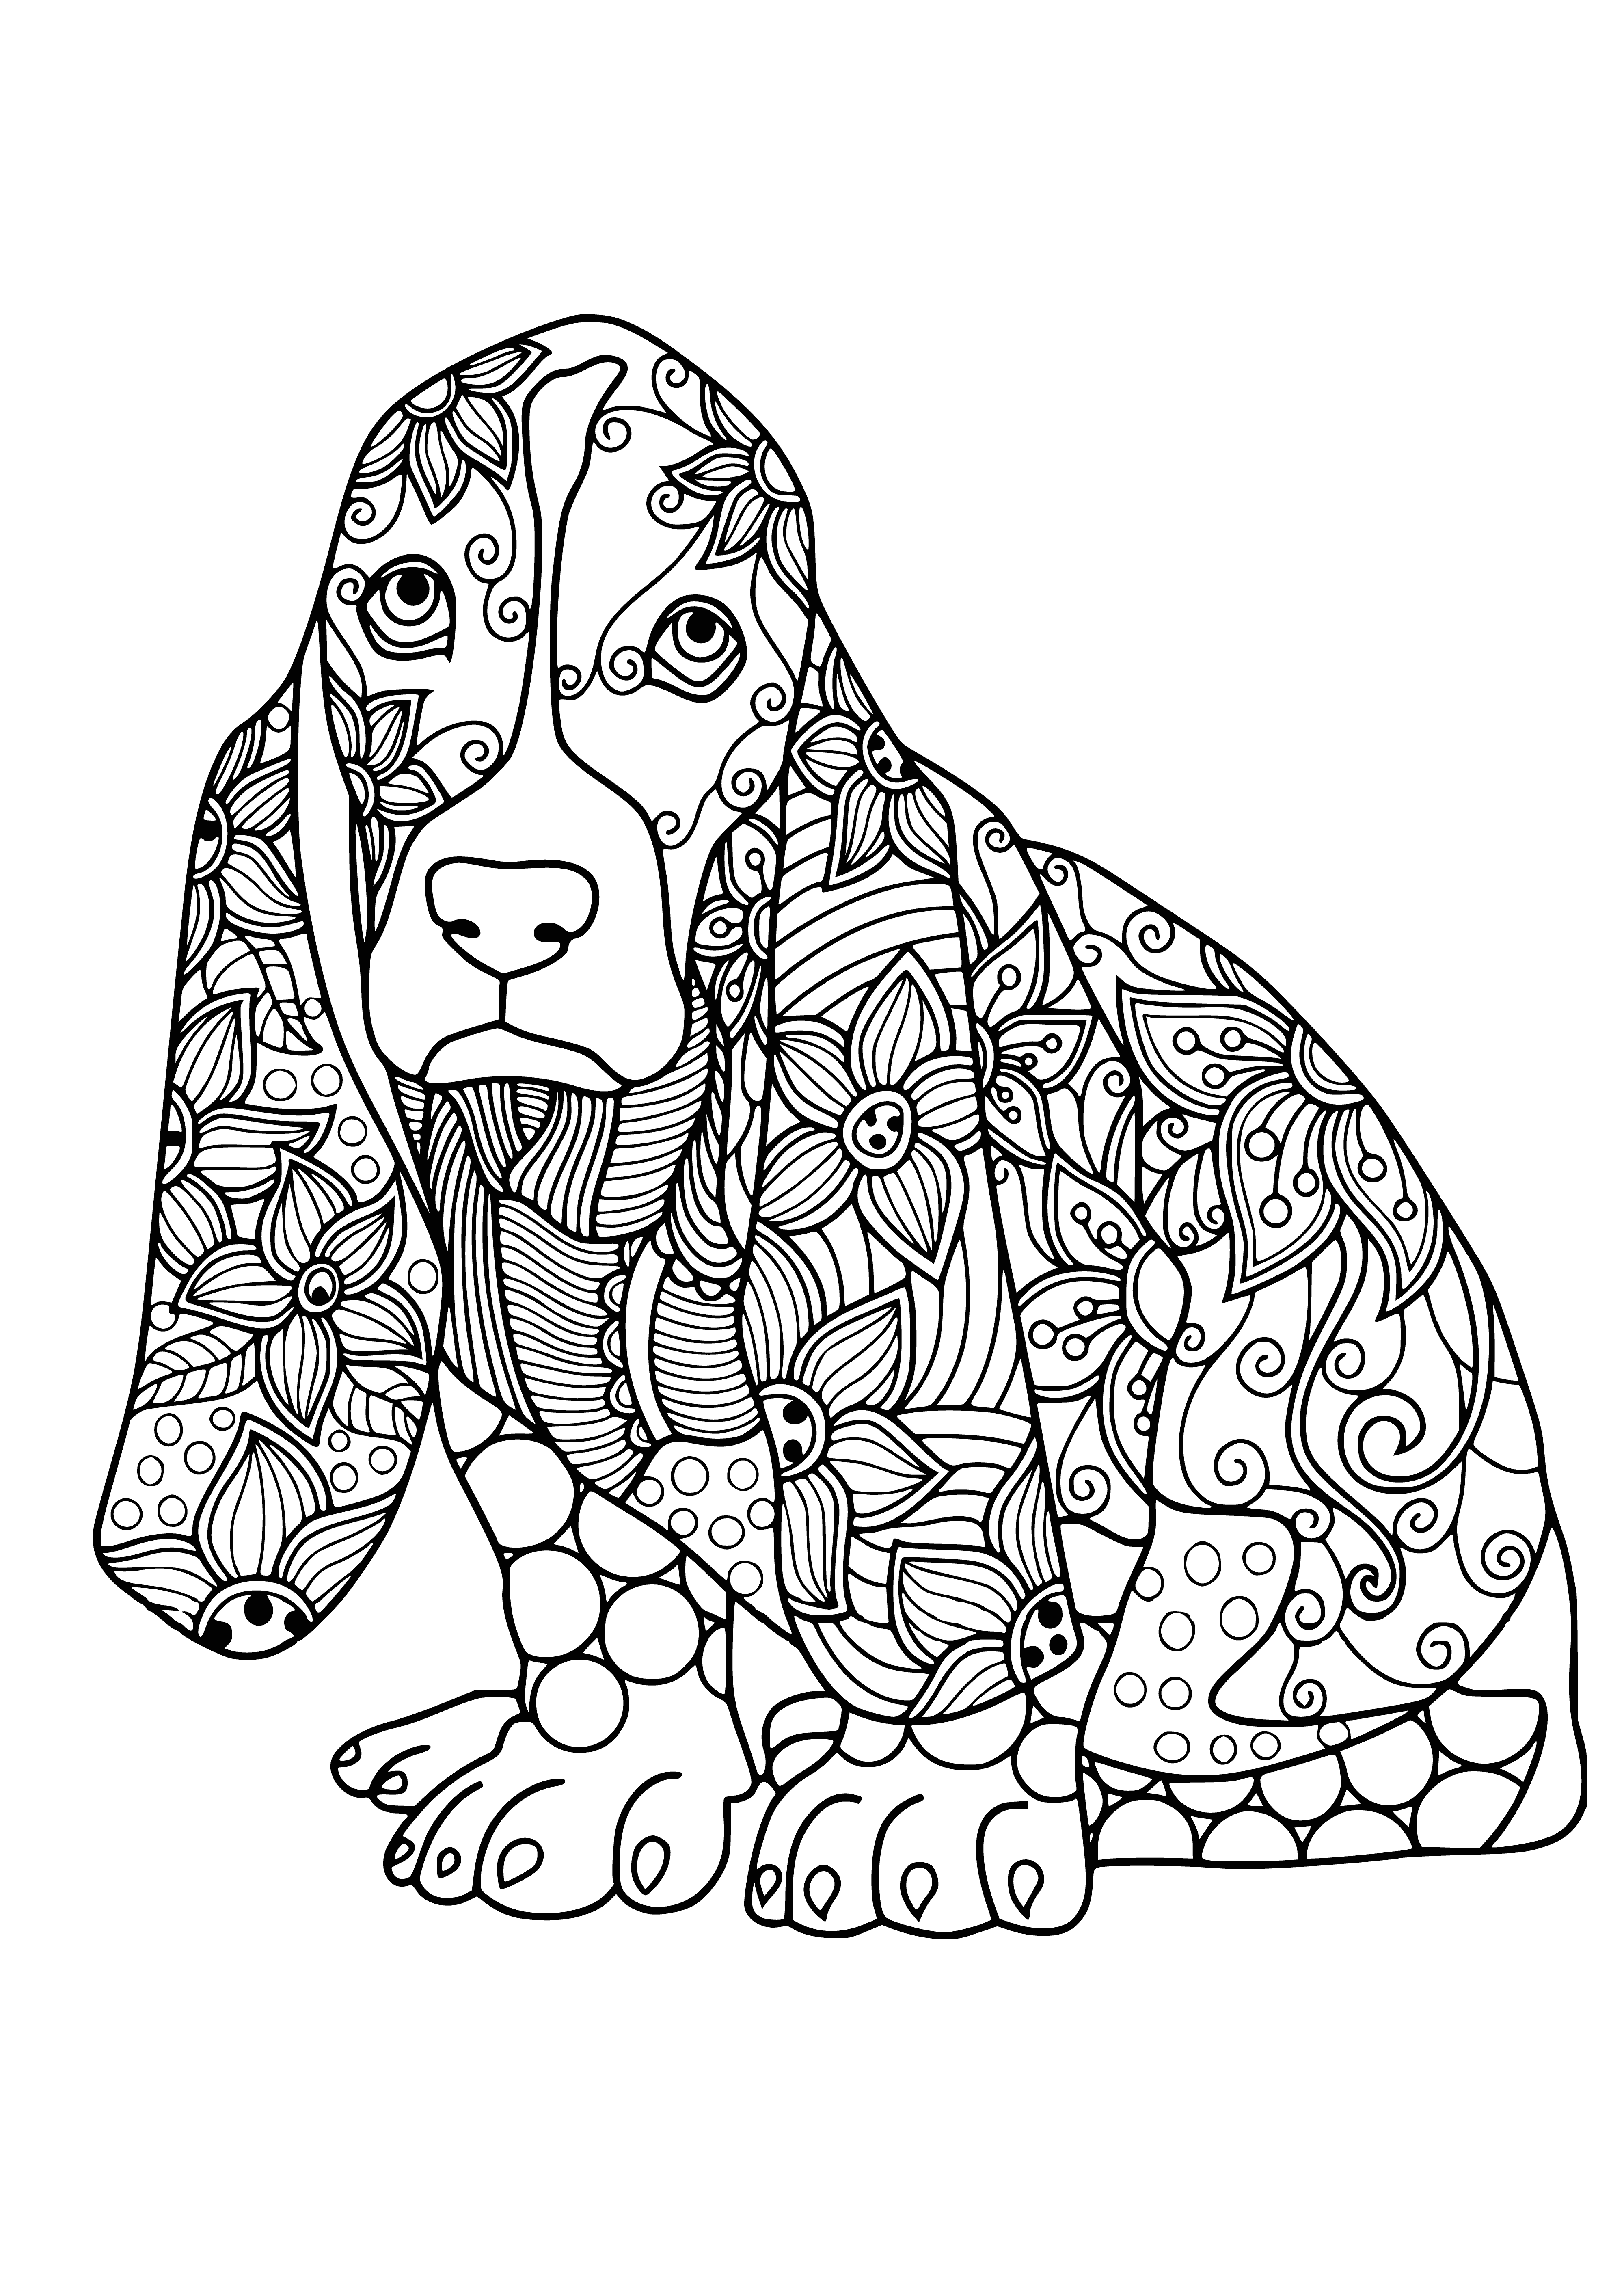 coloring page: A Basset Hound is featured on this coloring page. It has a long body and droopy ears. Its coat is short and brown with a white line on the face. #ColoringPages #Dogs